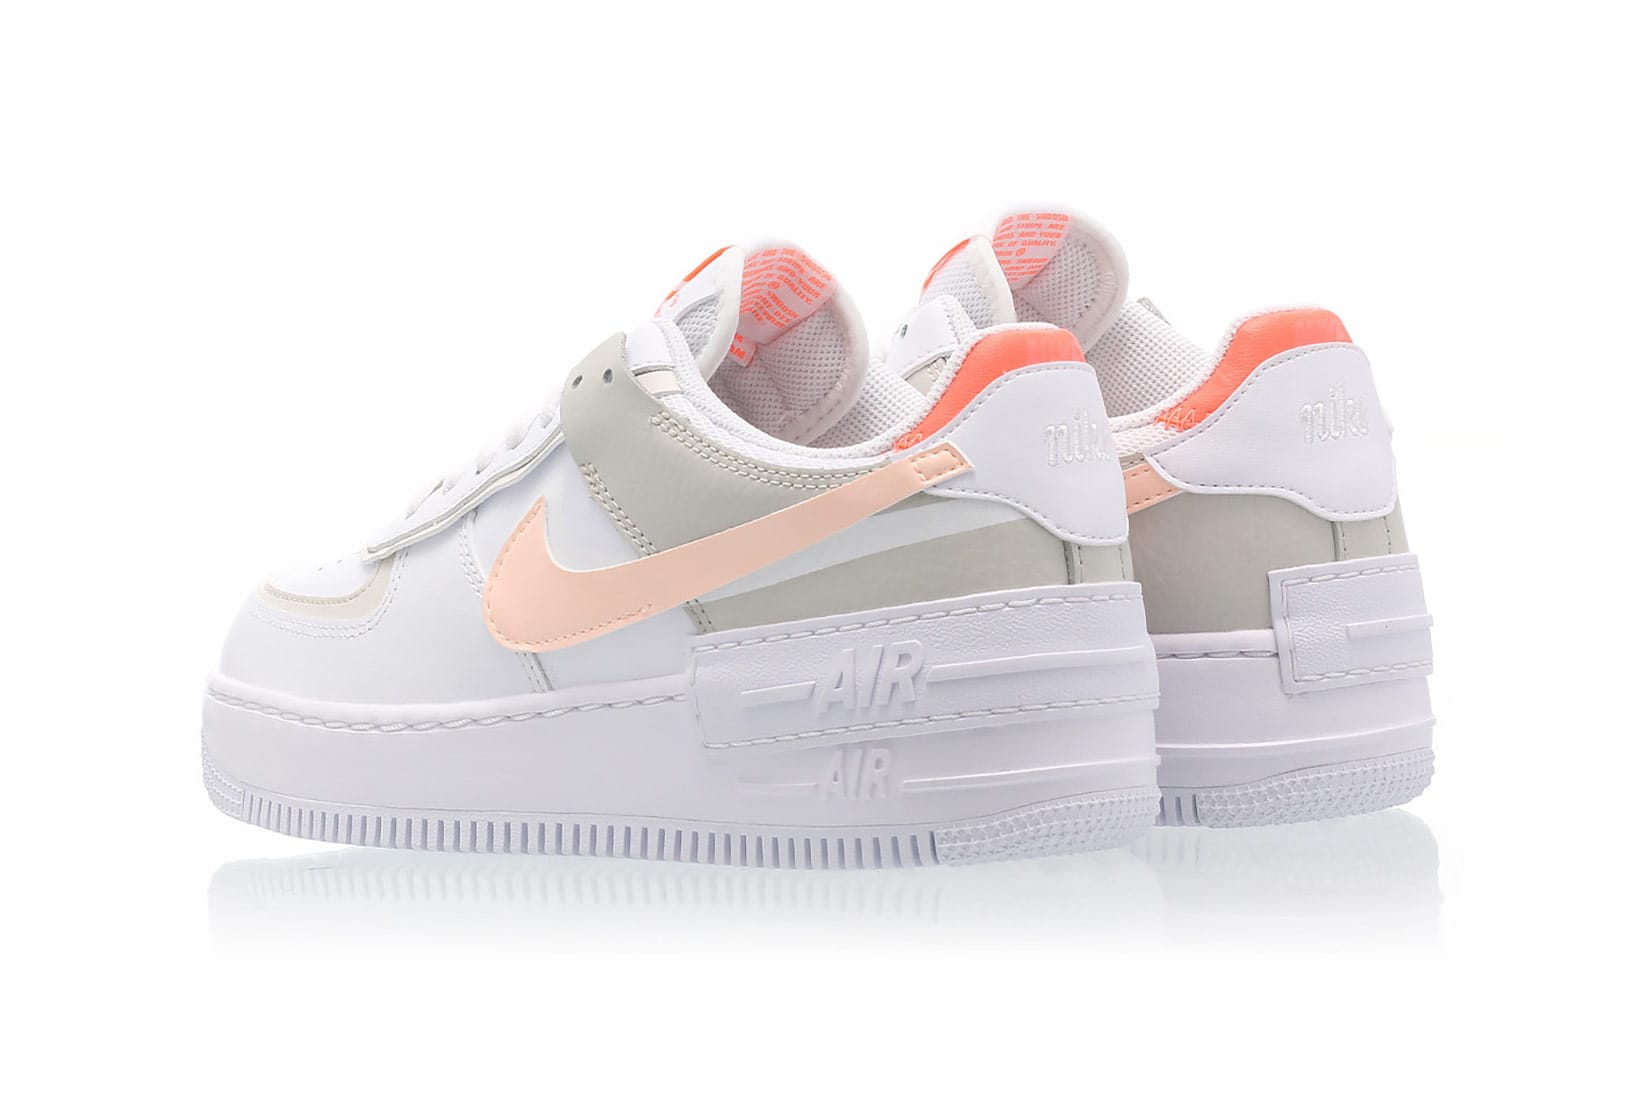 womens air force 1 shadow pink